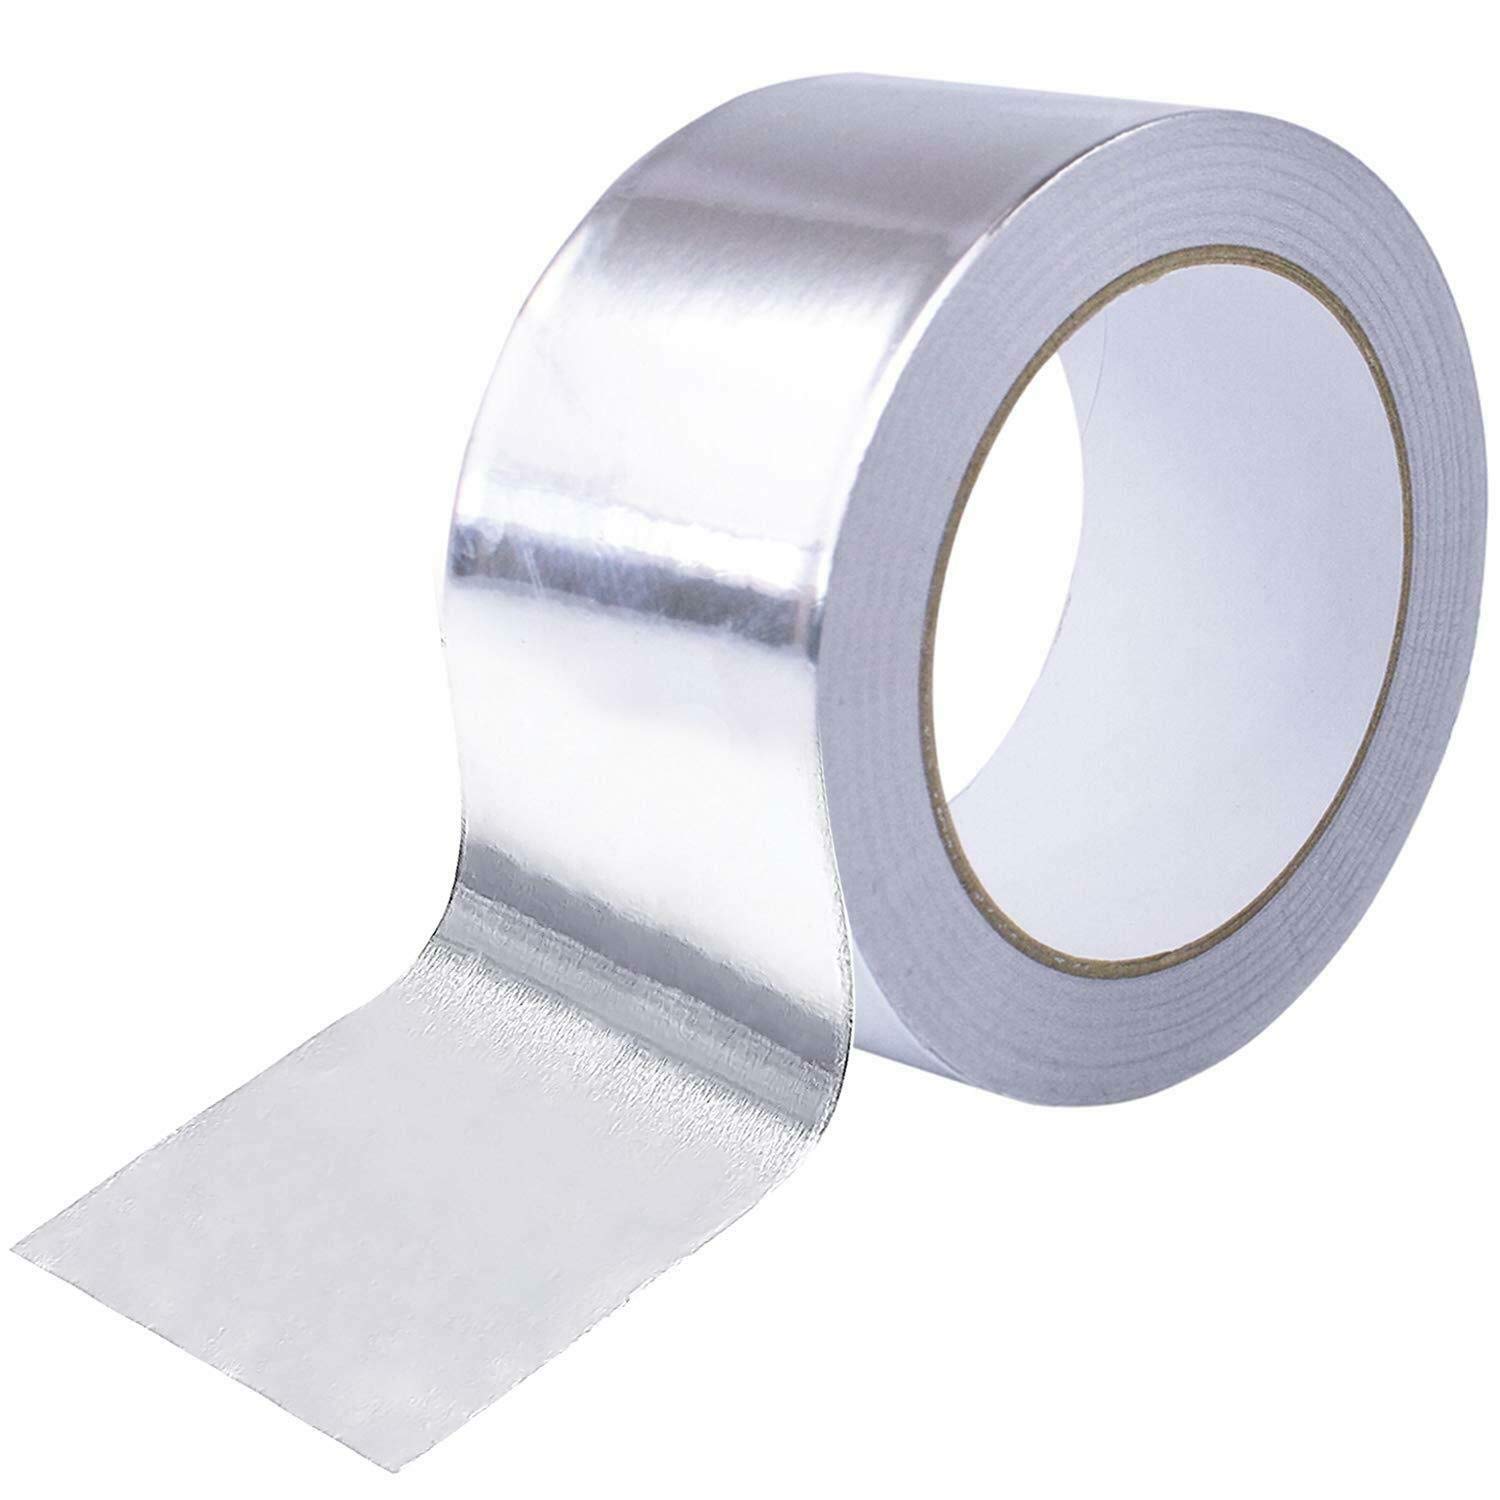 High Temp Foil Insulation Tape - Large Roll